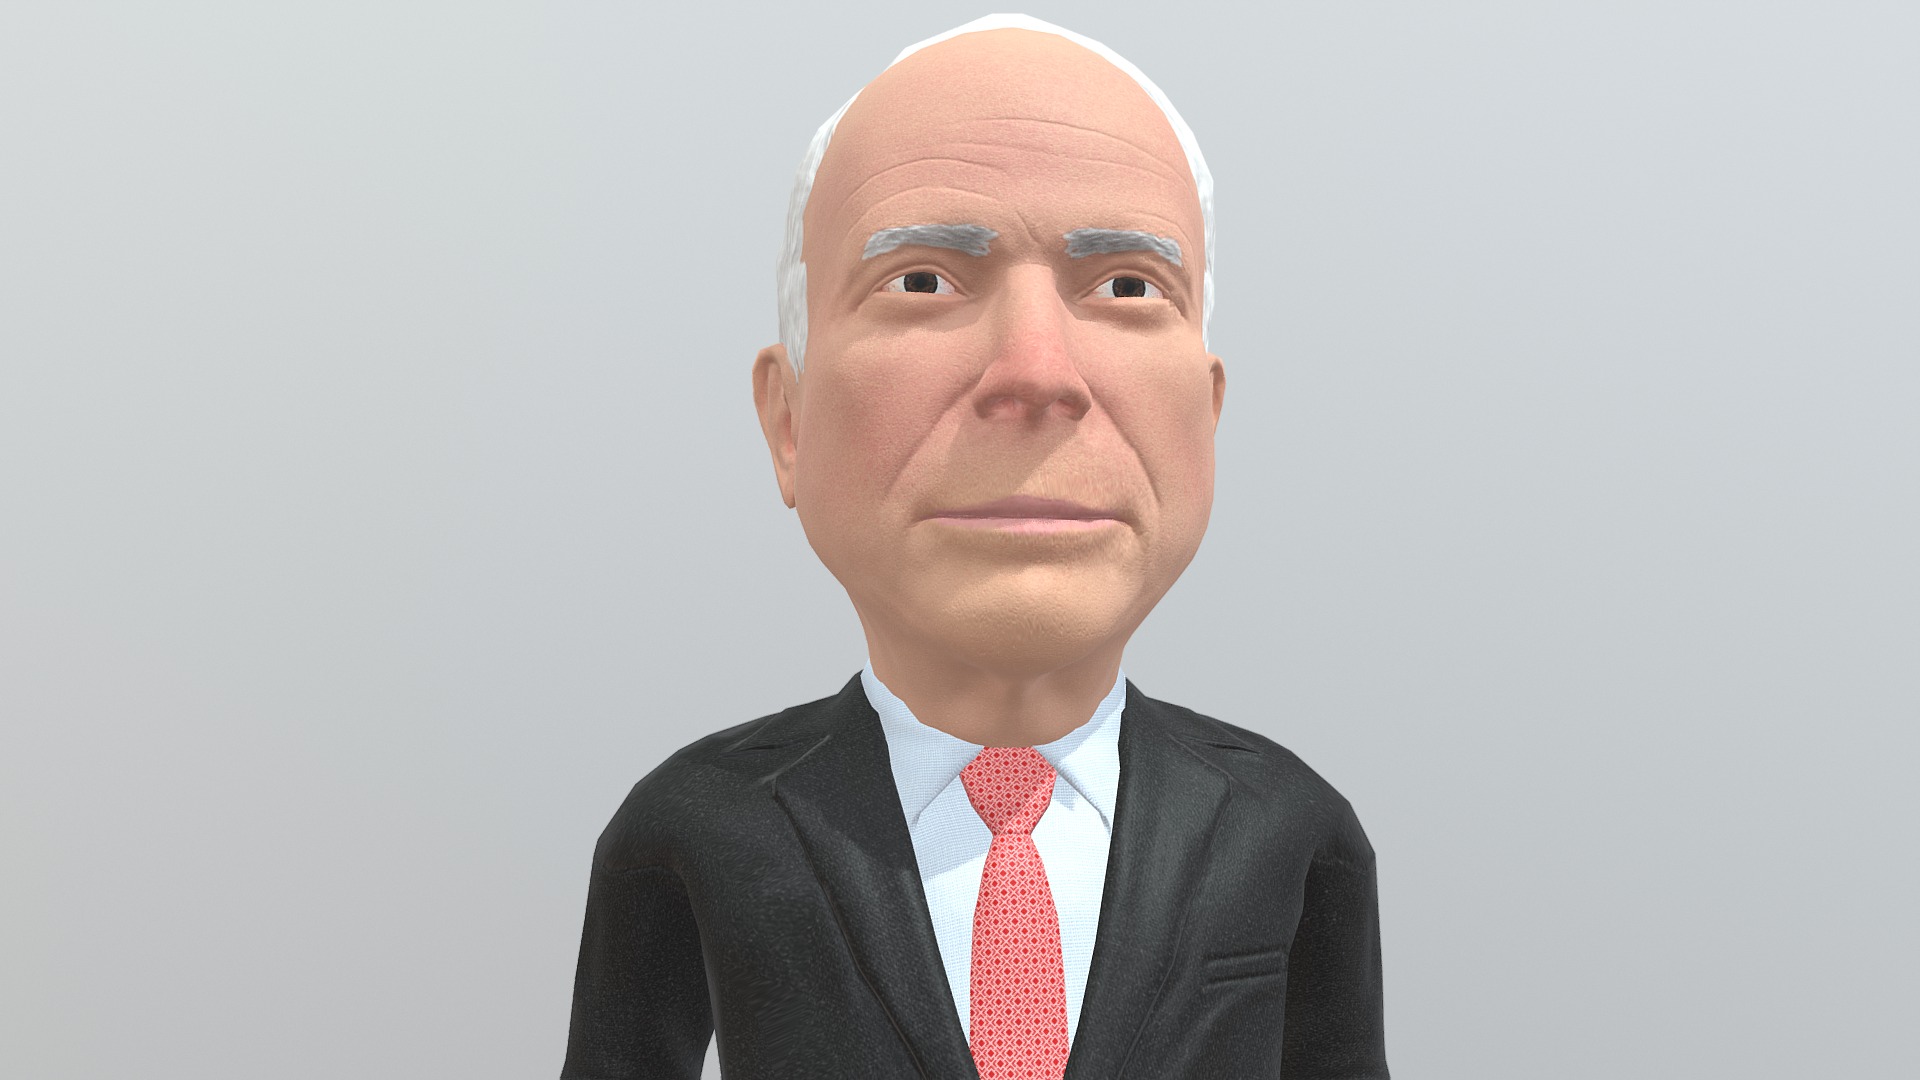 3D model John Mc Cain stylized 3d model - This is a 3D model of the John Mc Cain stylized 3d model. The 3D model is about a man in a suit and tie.